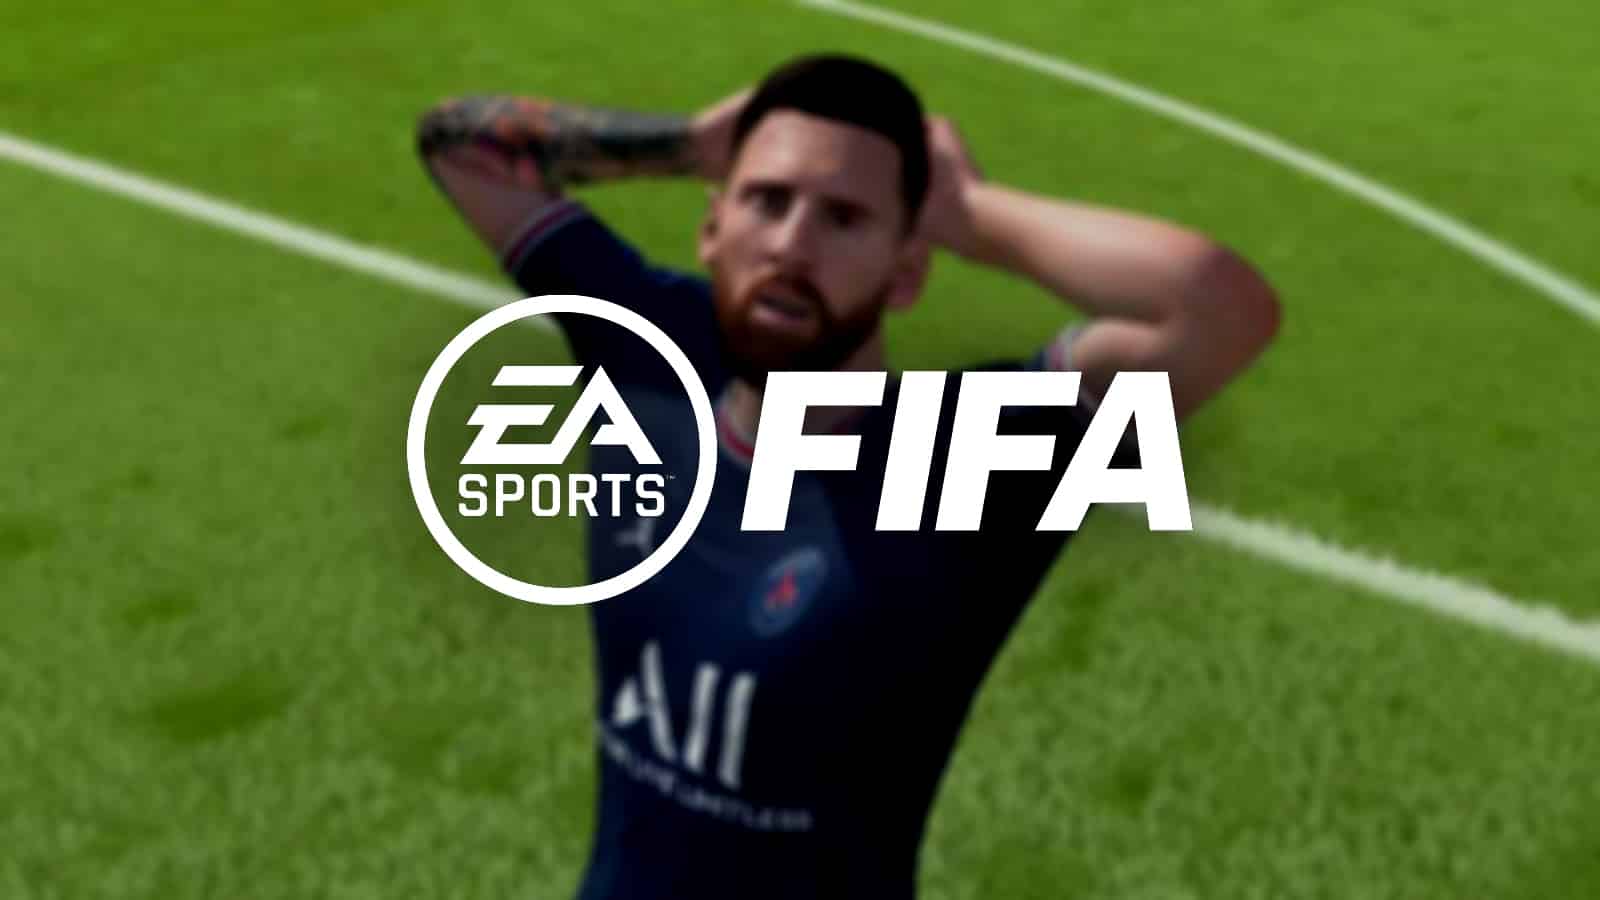 EA SPORTS FIFA logo with blurred Messi in background